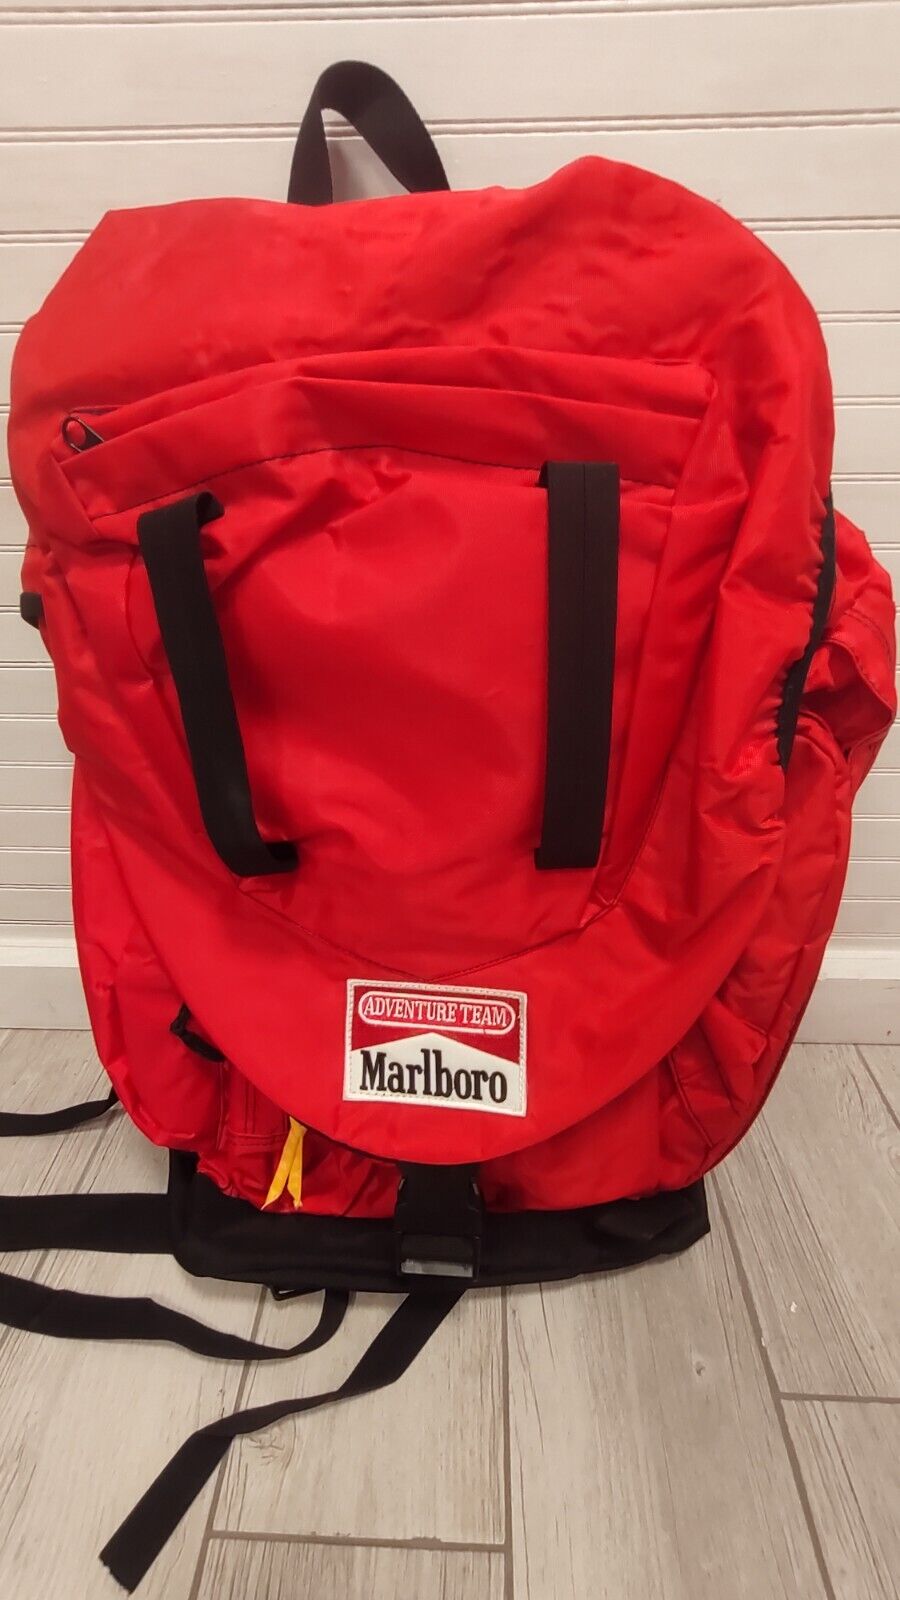 VTG Marlboro Adventure Team Red Large Camping Hiking Backpack Great Condition